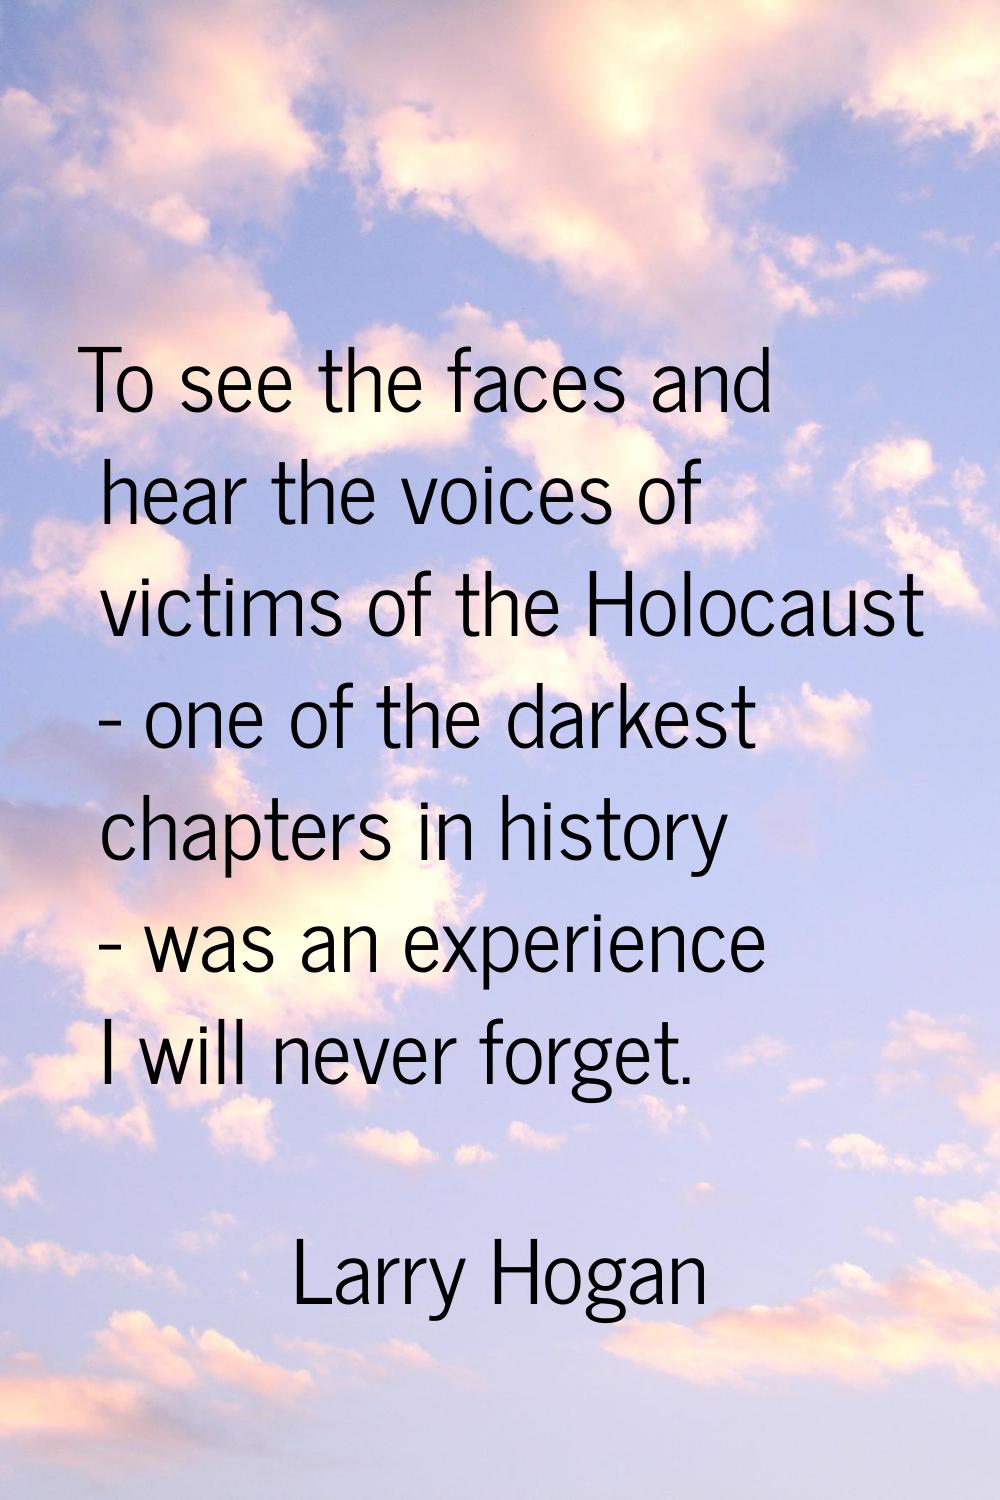 To see the faces and hear the voices of victims of the Holocaust - one of the darkest chapters in h